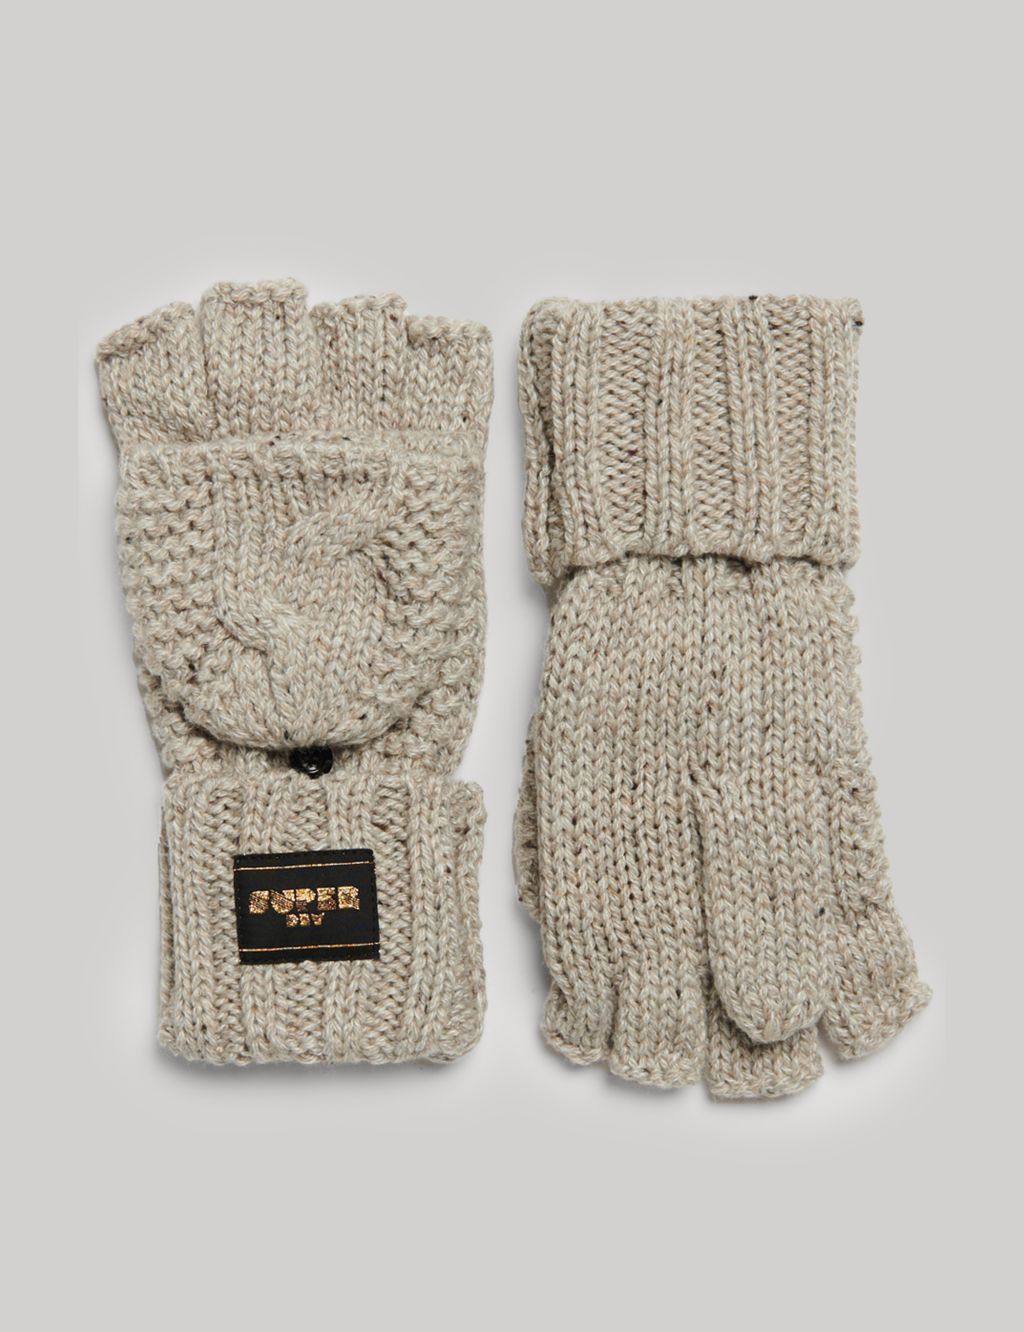 Knitted Cable Gloves with Wool image 1